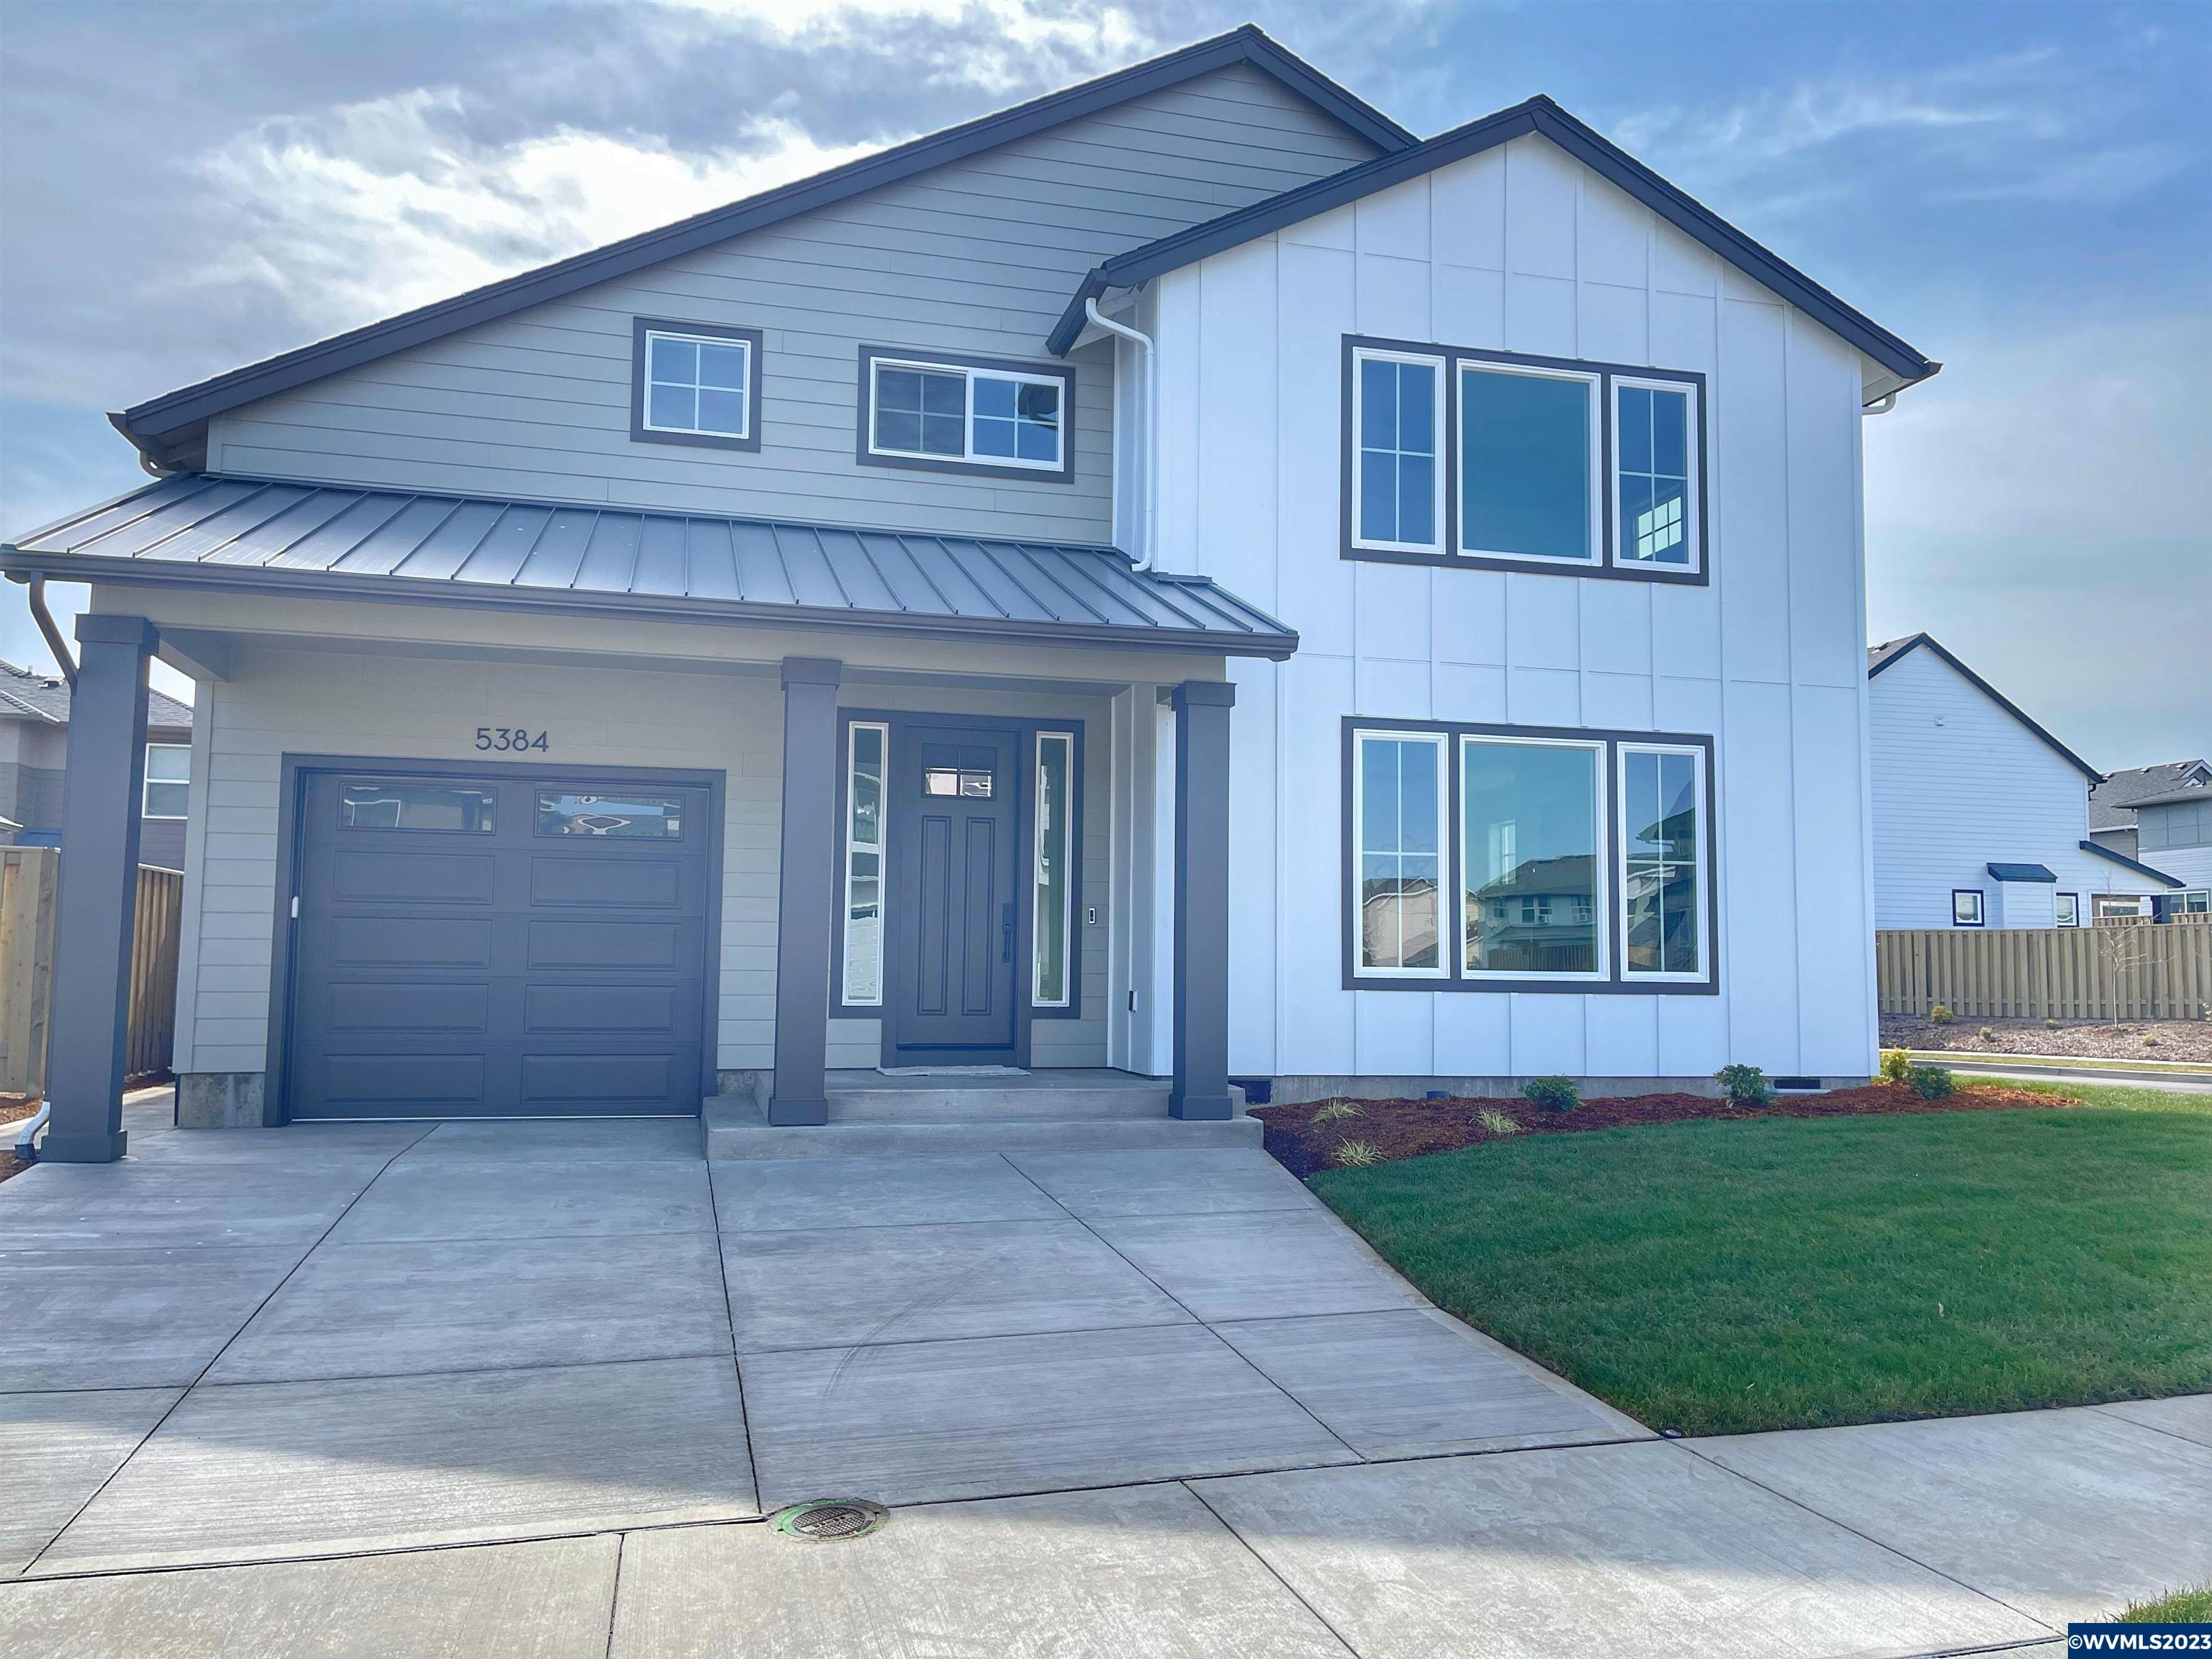 Move-in ready today!  Brand New Construction by Legend Homes & beautiful new Corvallis neighborhood. The “Chapman”. Open main floor with fantastic kitchen with large island and quartz counters. 3 spacious bdrms, large main suite &  Views!  Covered patio. Finished backyard.   Desirable floorplan inc. main level living with Master Suite on main level! Sq ft. does not include 200+/- large storage room. Grn built, energy efficient and extended home warranty. Tour today.